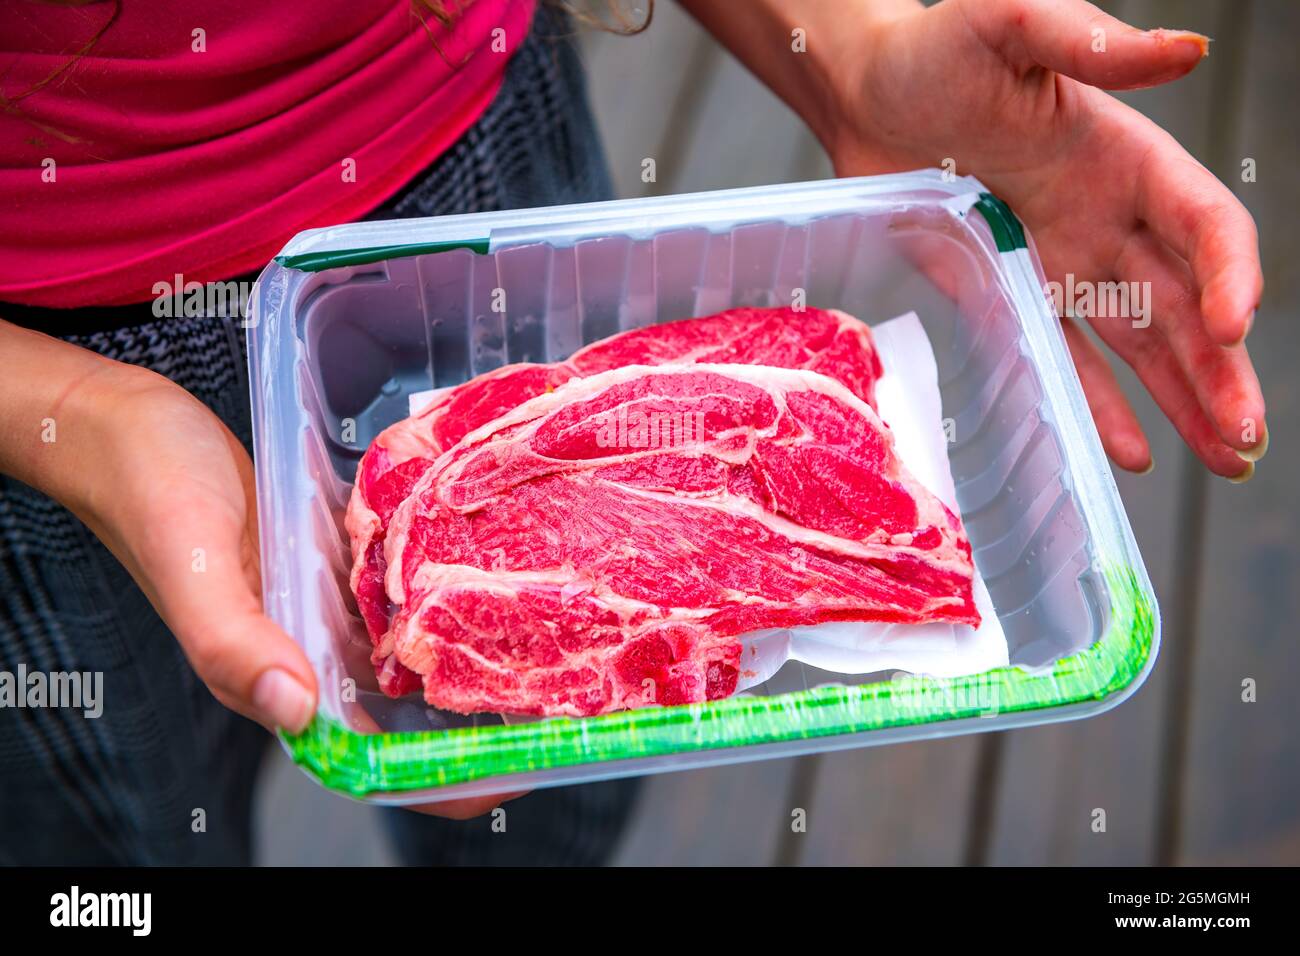 Red raw lamb meat shoulder chops from New Zealand packaged storebought with woman holding open plastic container showing Stock Photo